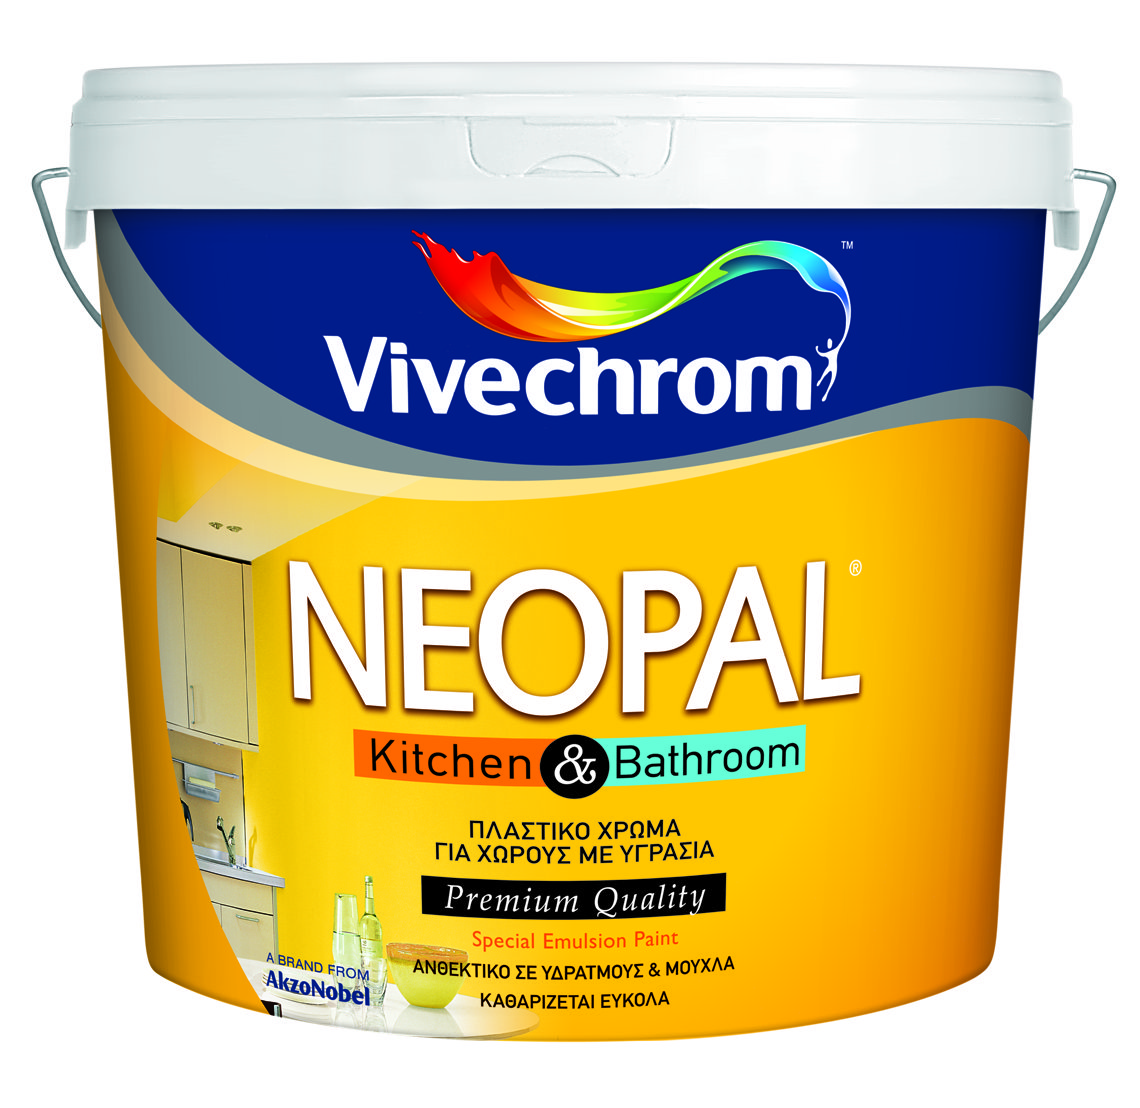 Vivechrom Neopal Kitchen & Bathroom Mixing Base P 10L